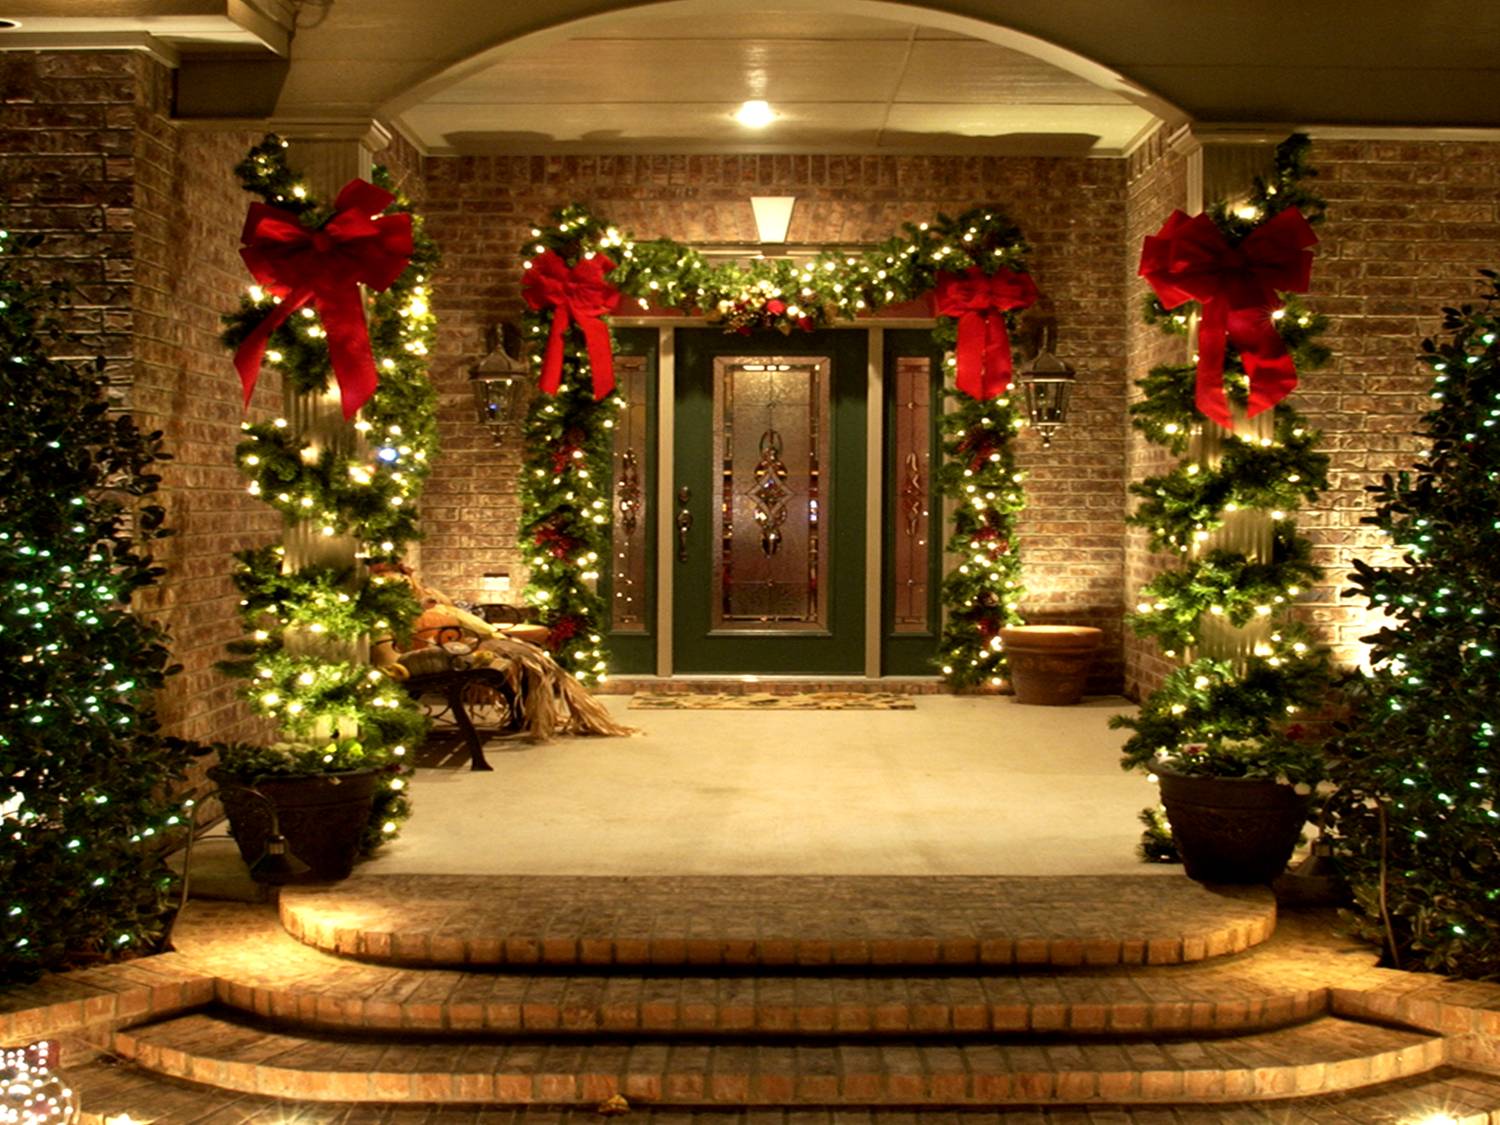 A picture of the Christmas decorations at the house entrance